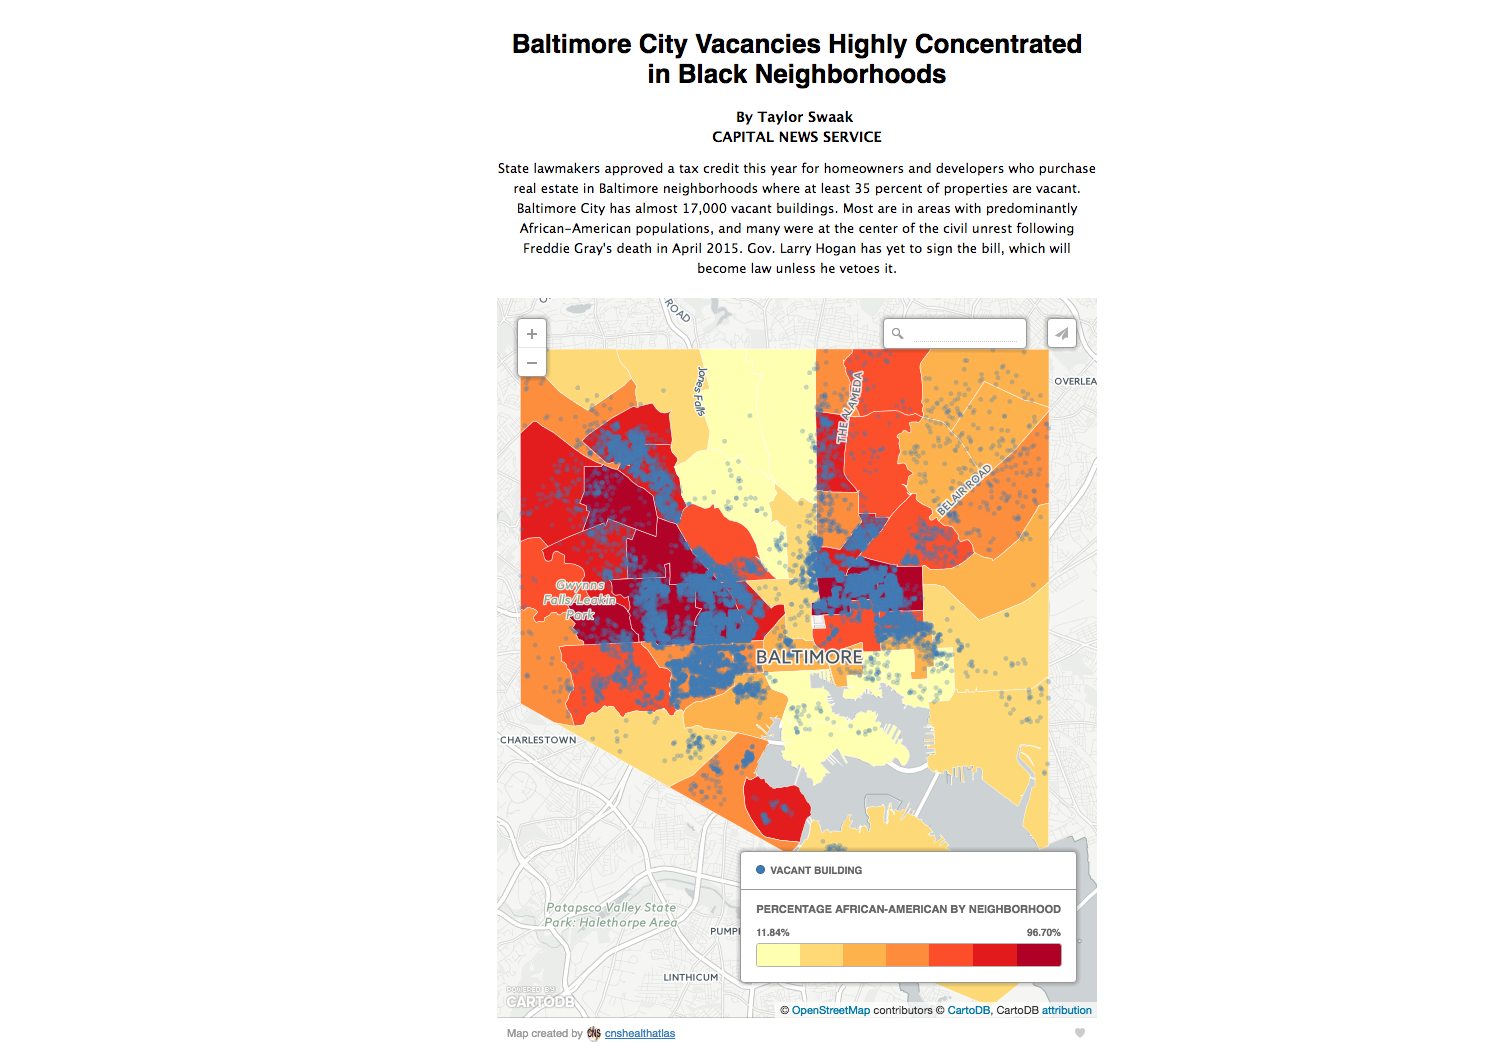 The General Assembly passed legislation this session on a number of issues affecting Baltimore, including vacant properties, mapped in this graphic.